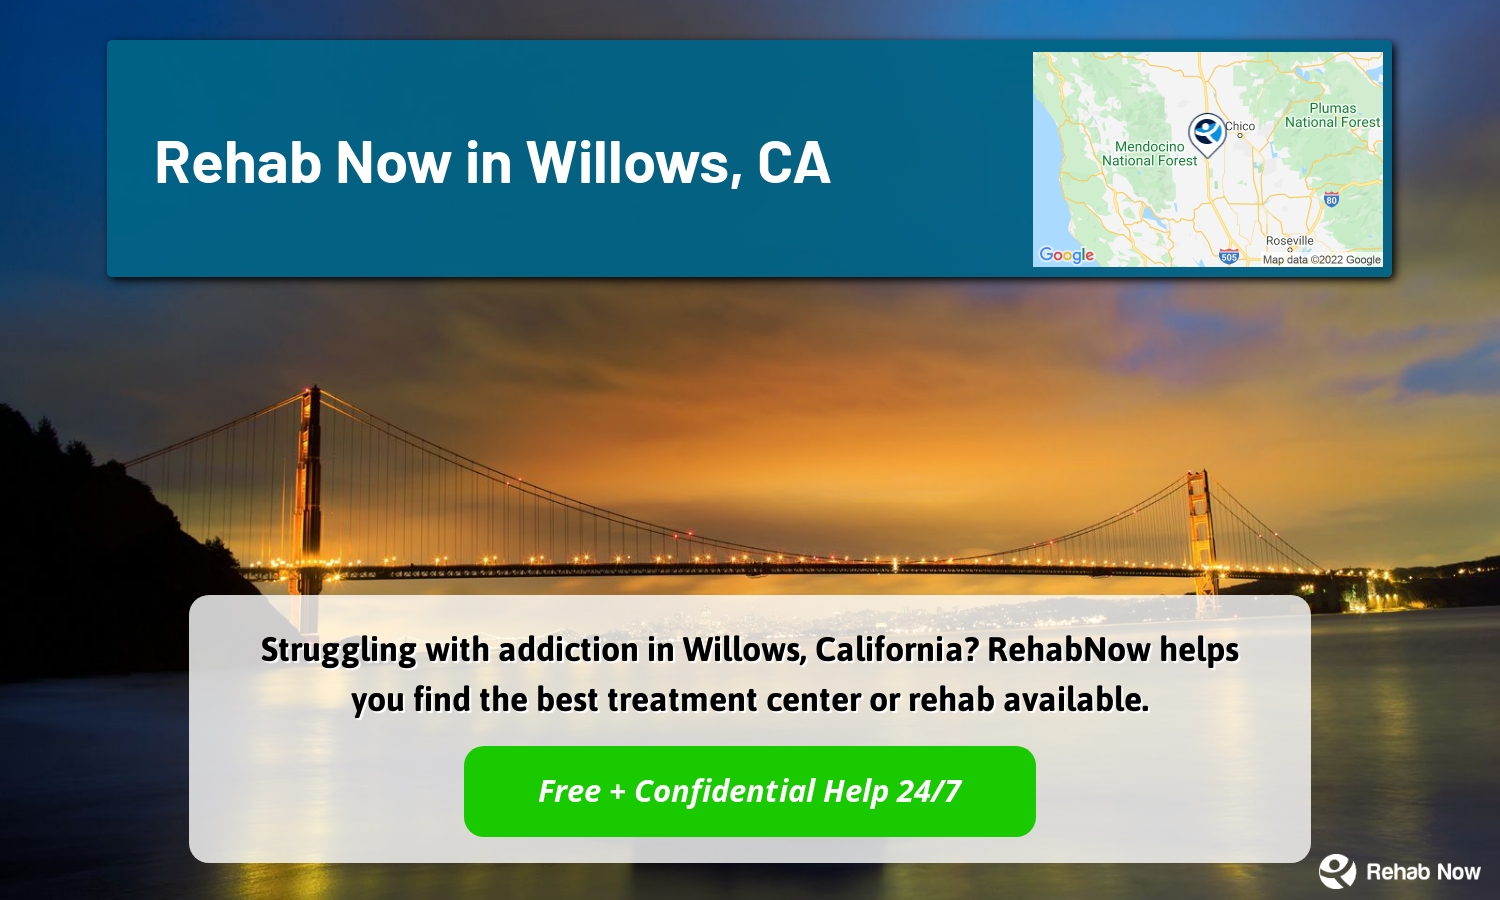 Struggling with addiction in Willows, California? RehabNow helps you find the best treatment center or rehab available.